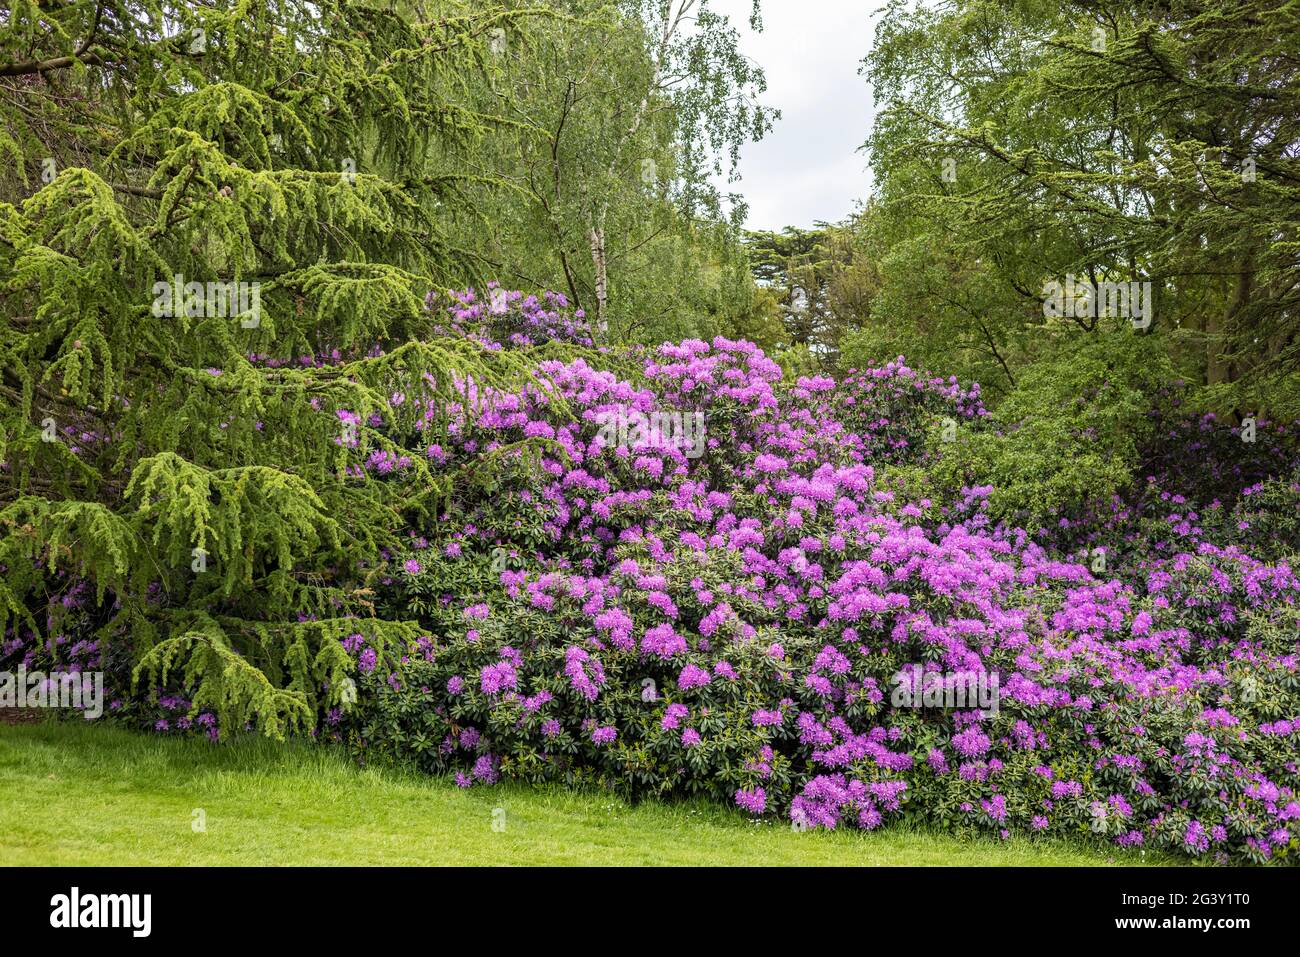 Large flowering shrub of purple rhododendron in park. Stock Photo